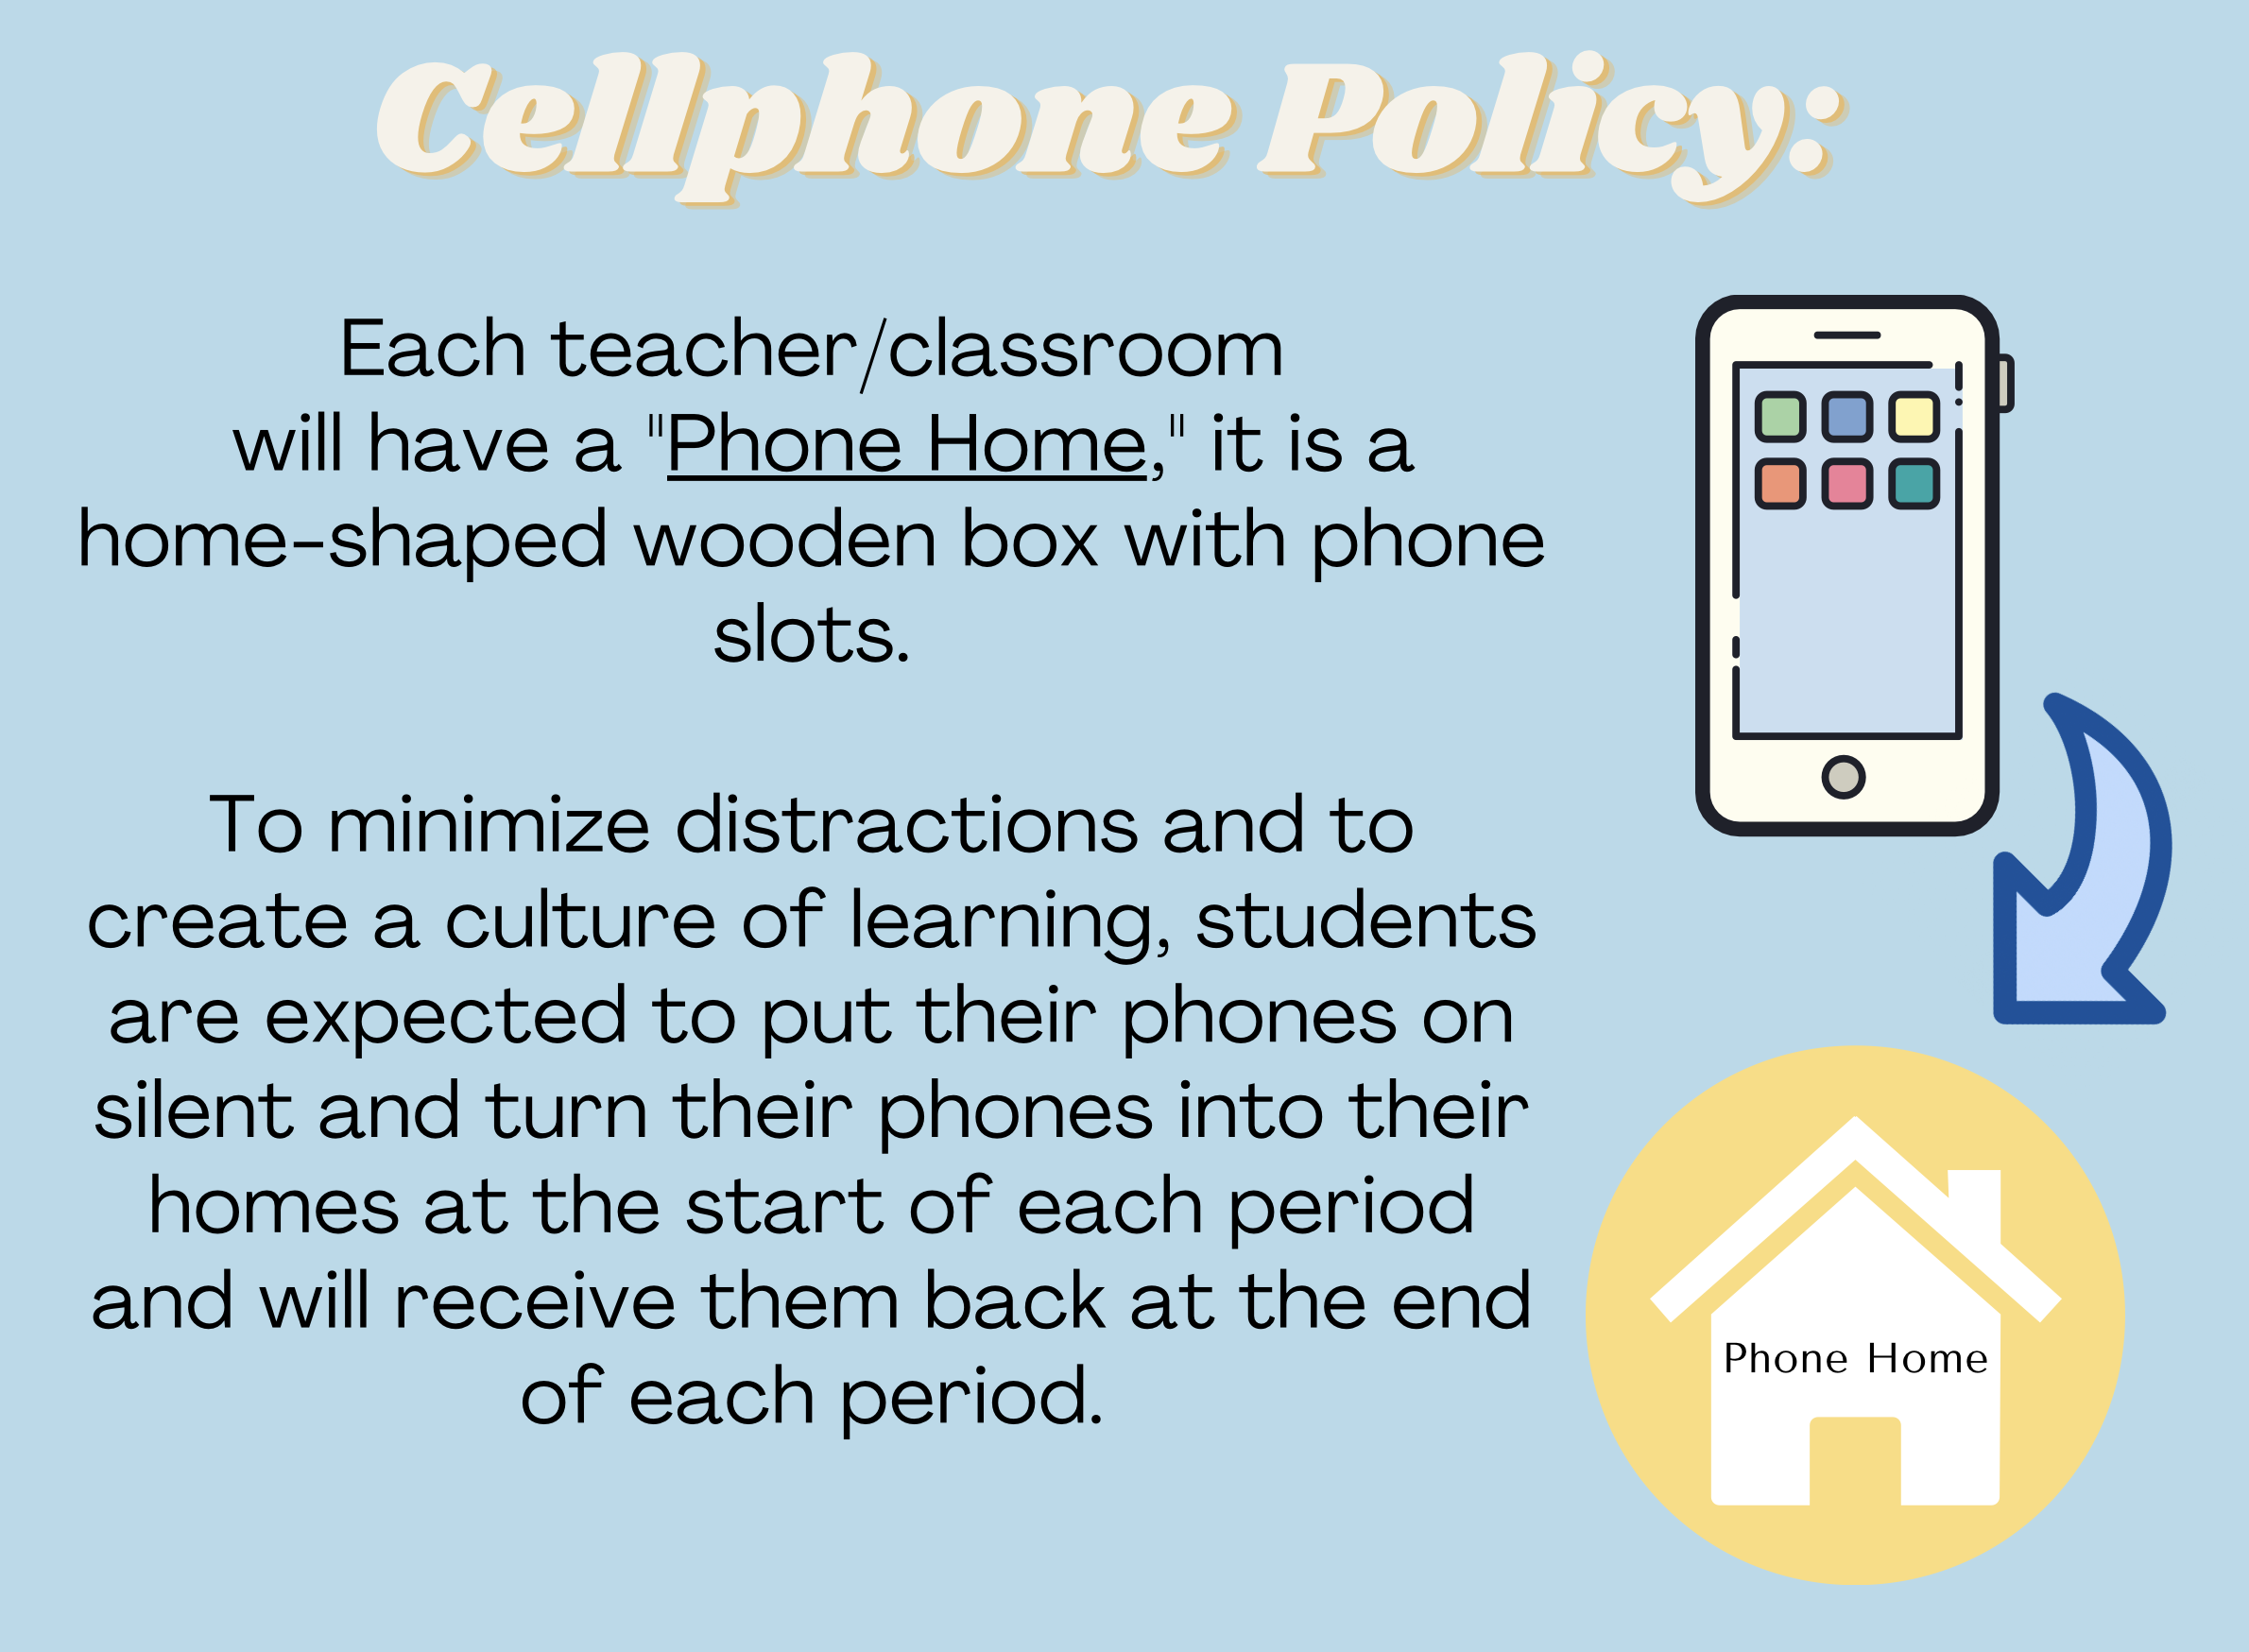 School Cell Phone policy